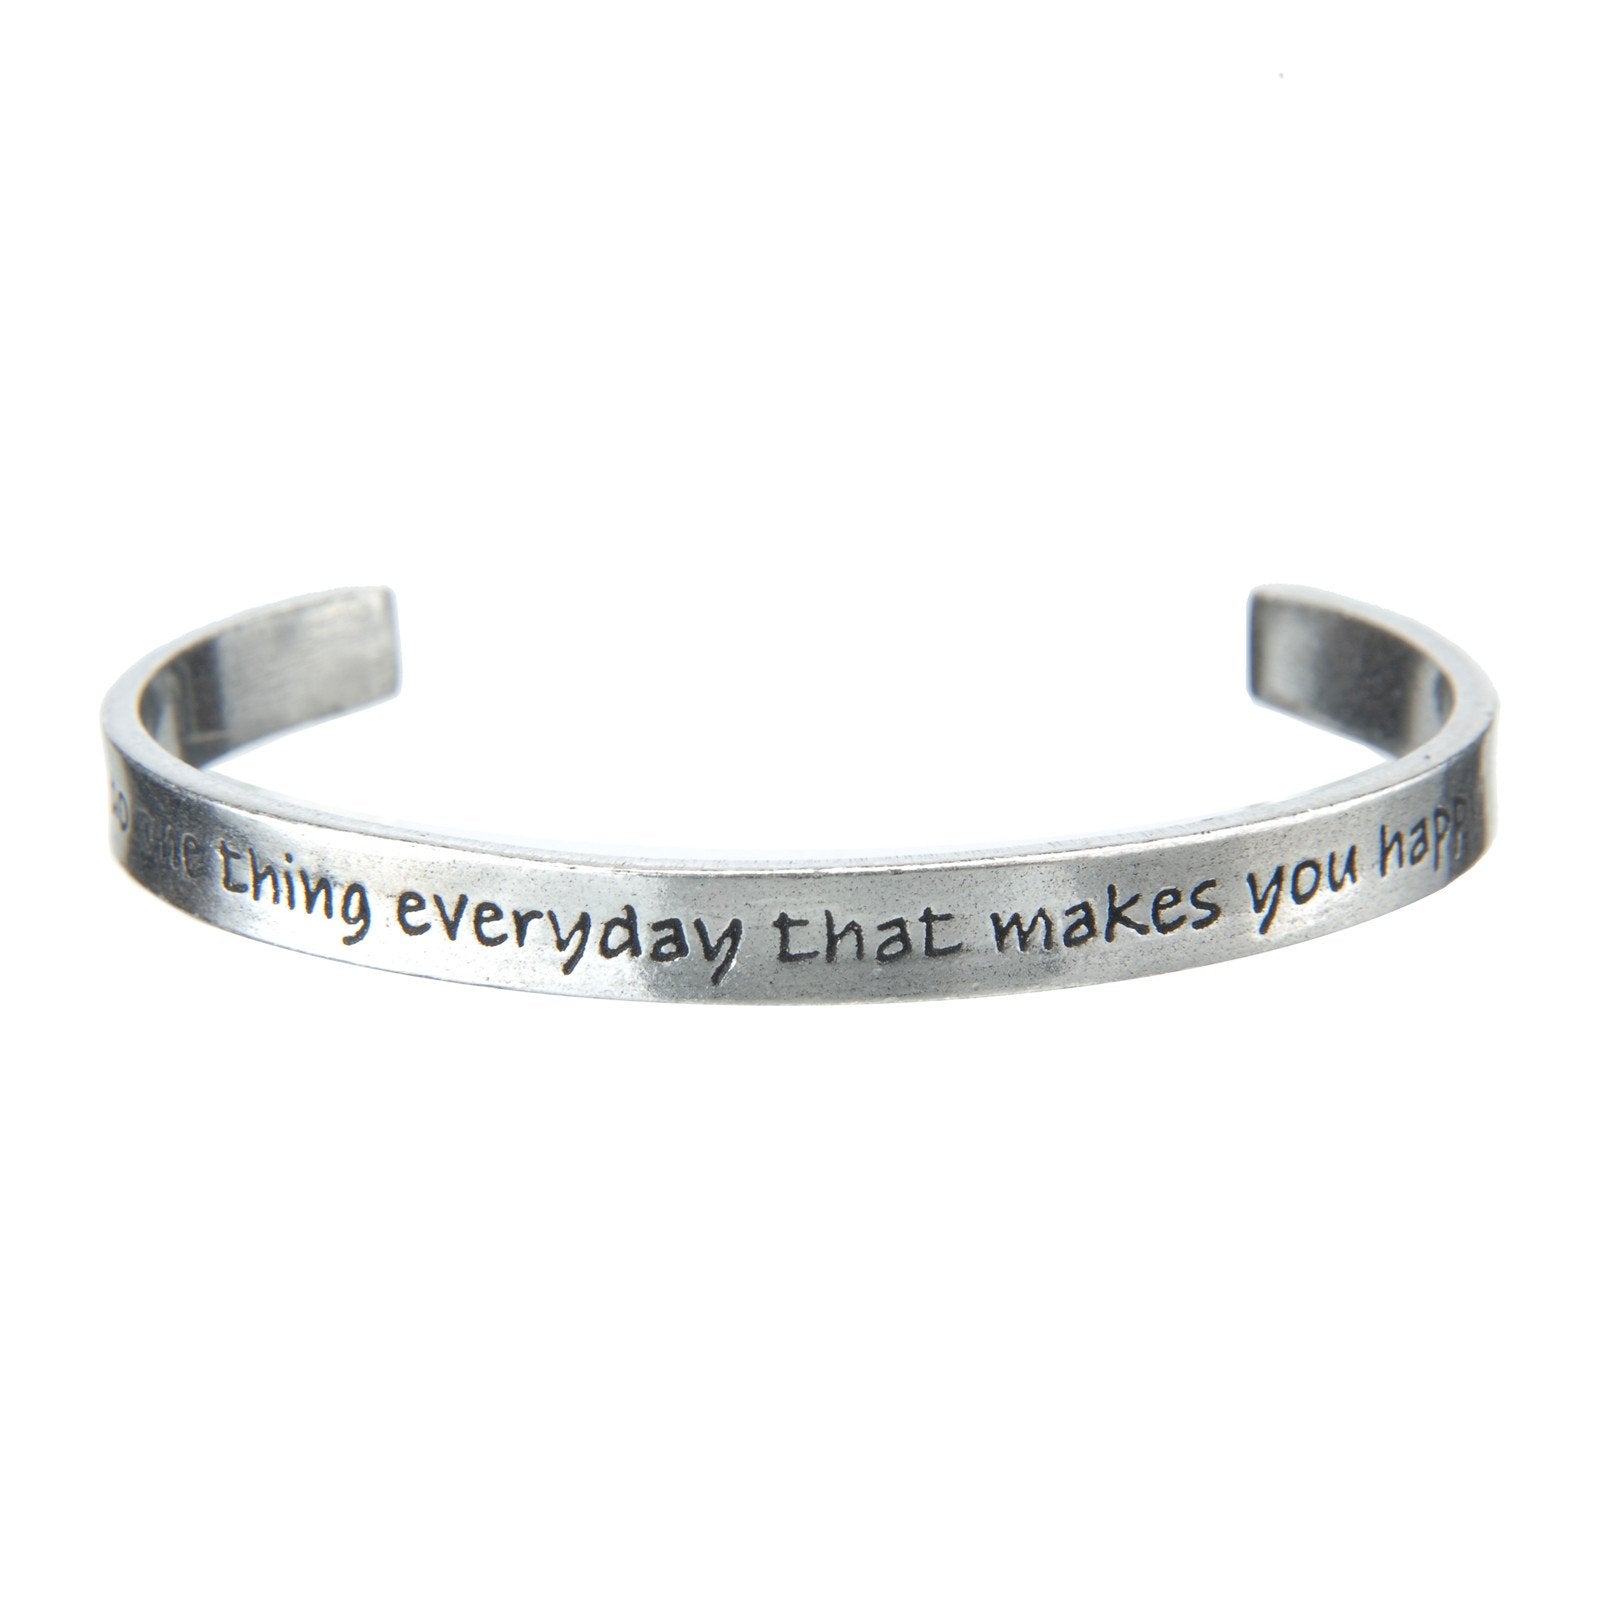 Do One Thing Everyday that Makes You Happy Quotable Cuff Bracelet